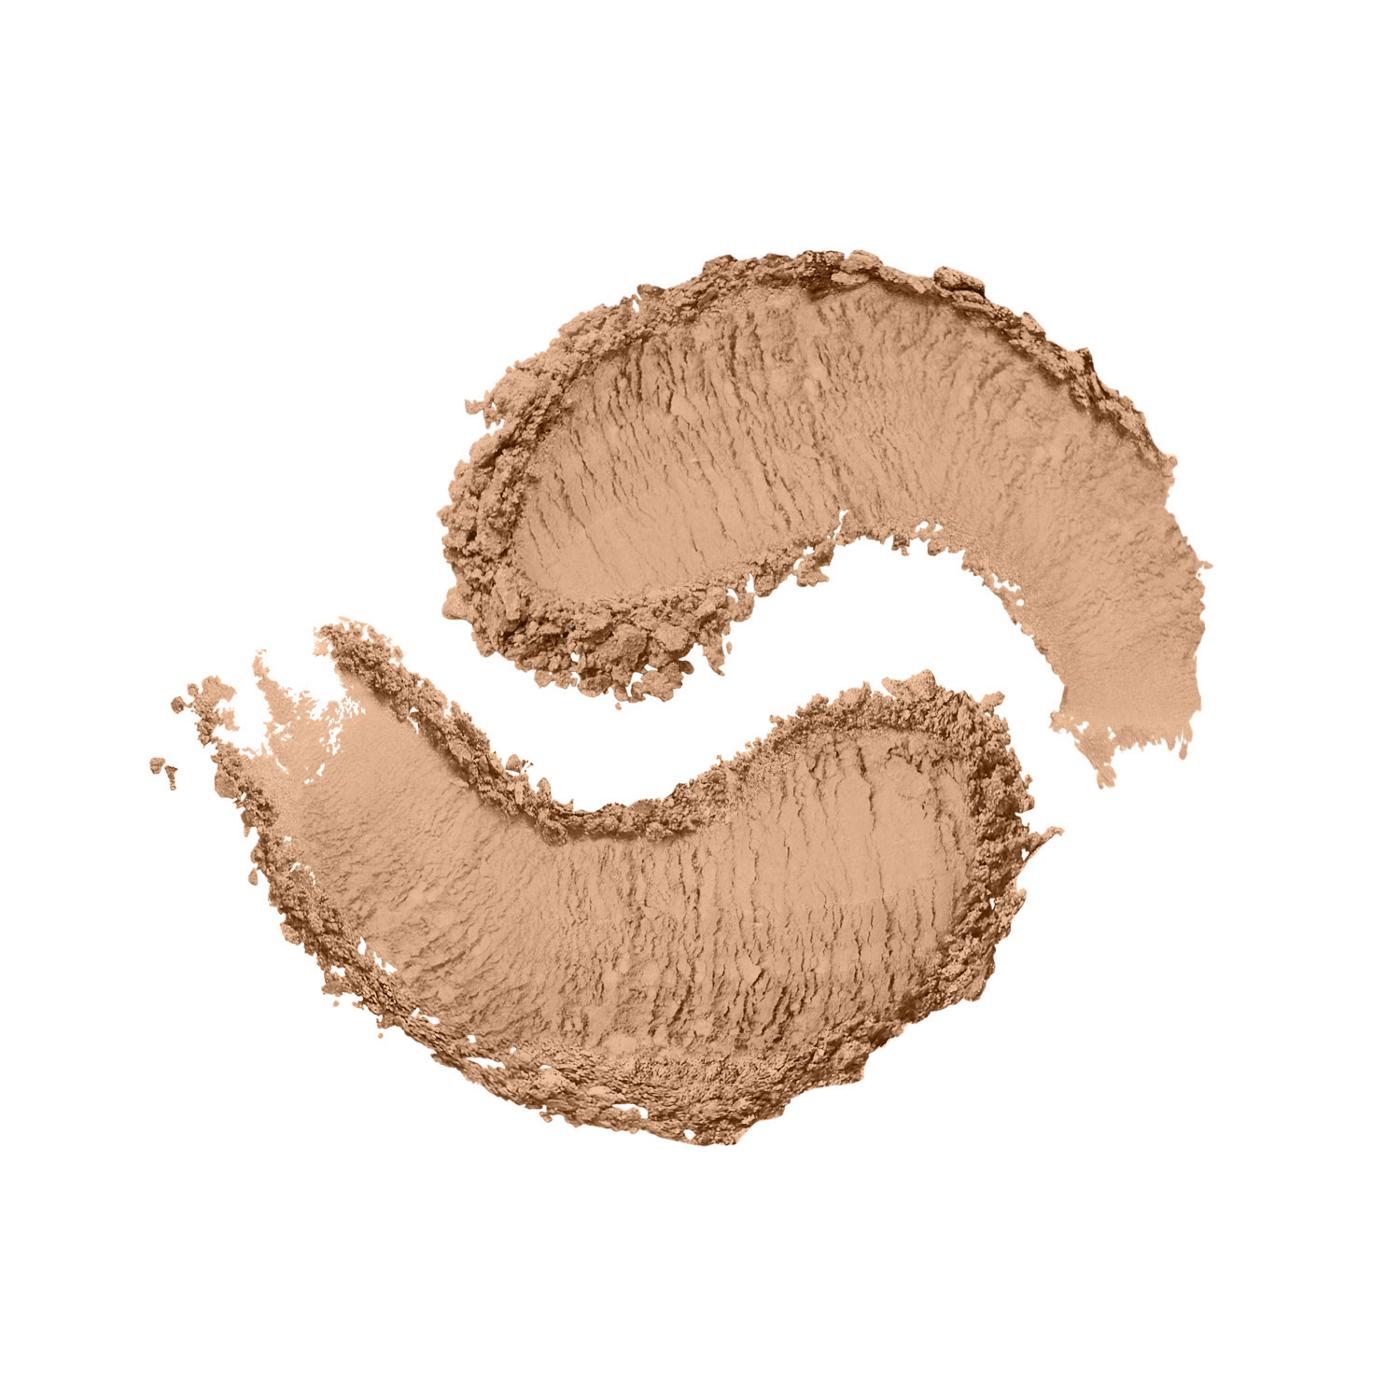 Covergirl Simply Ageless Pressed Powder 225 Buff Beige; image 12 of 13